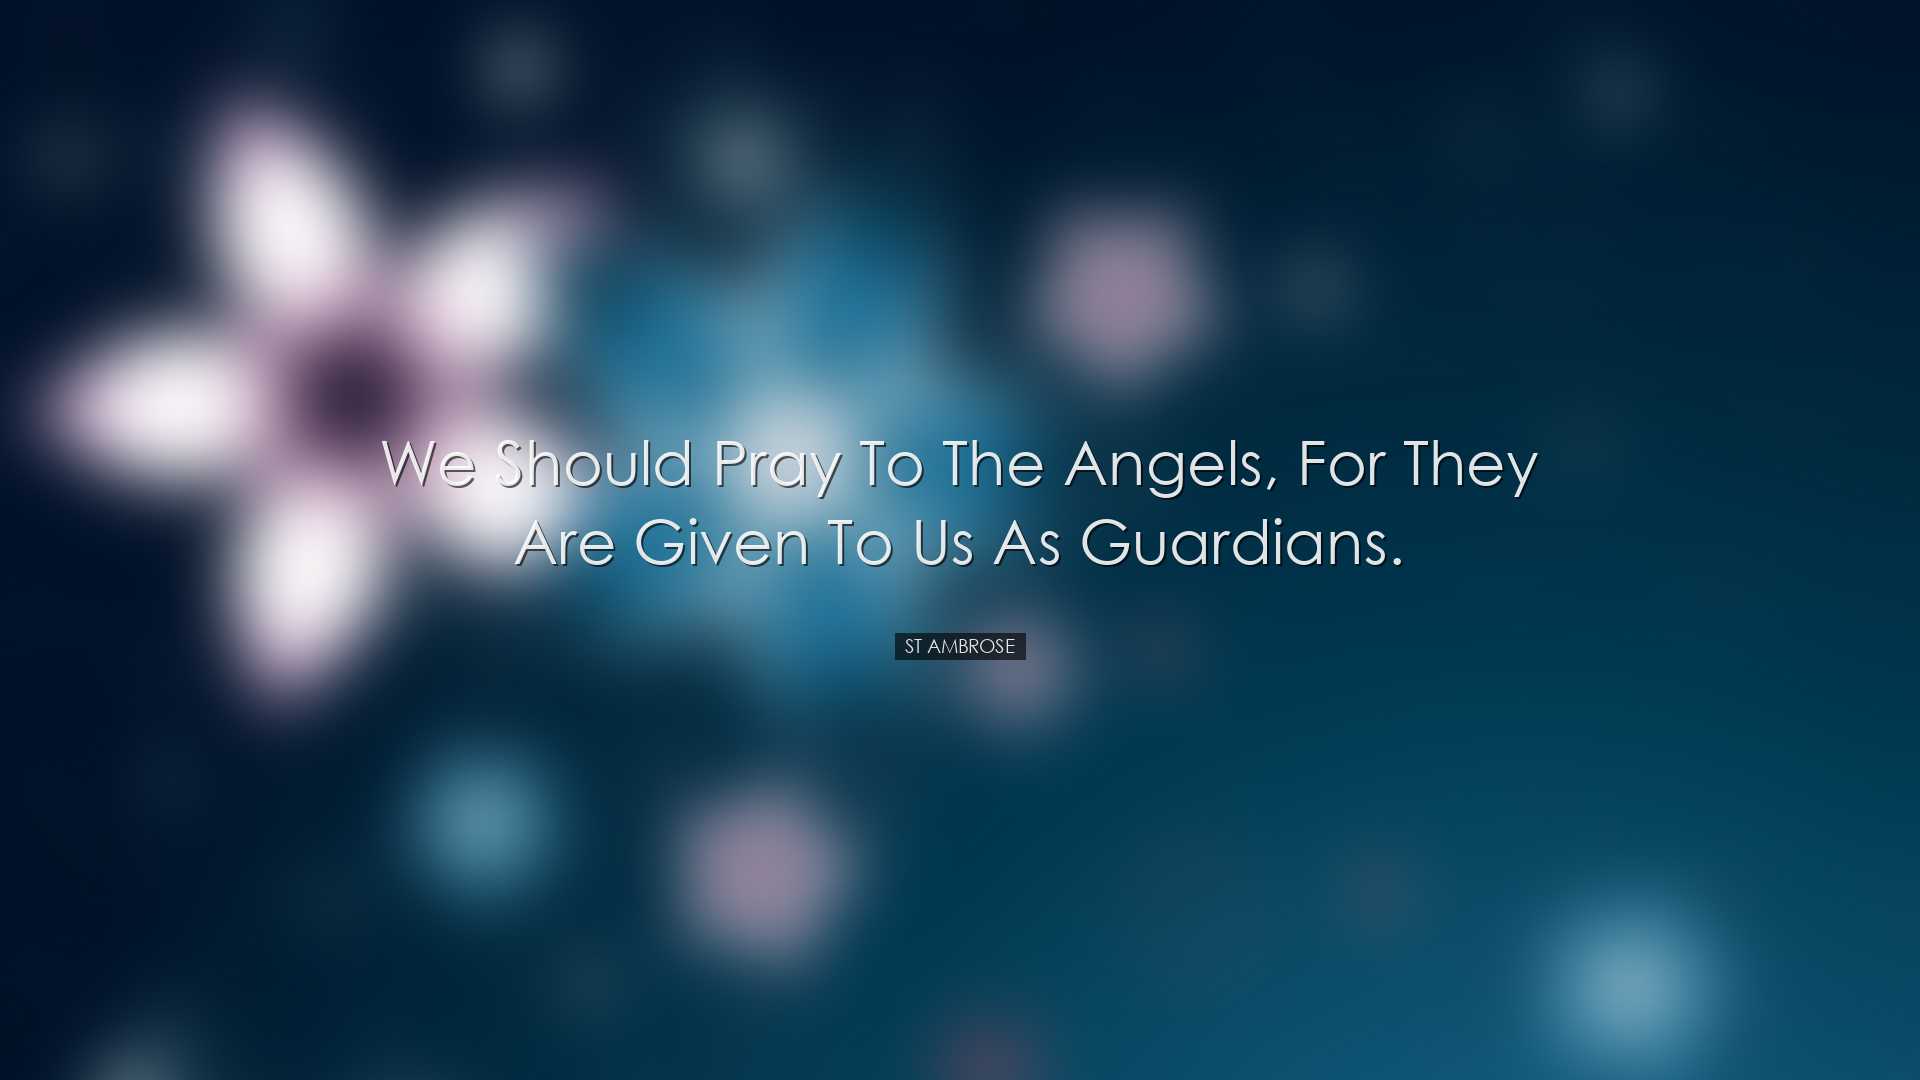 We should pray to the angels, for they are given to us as guardian